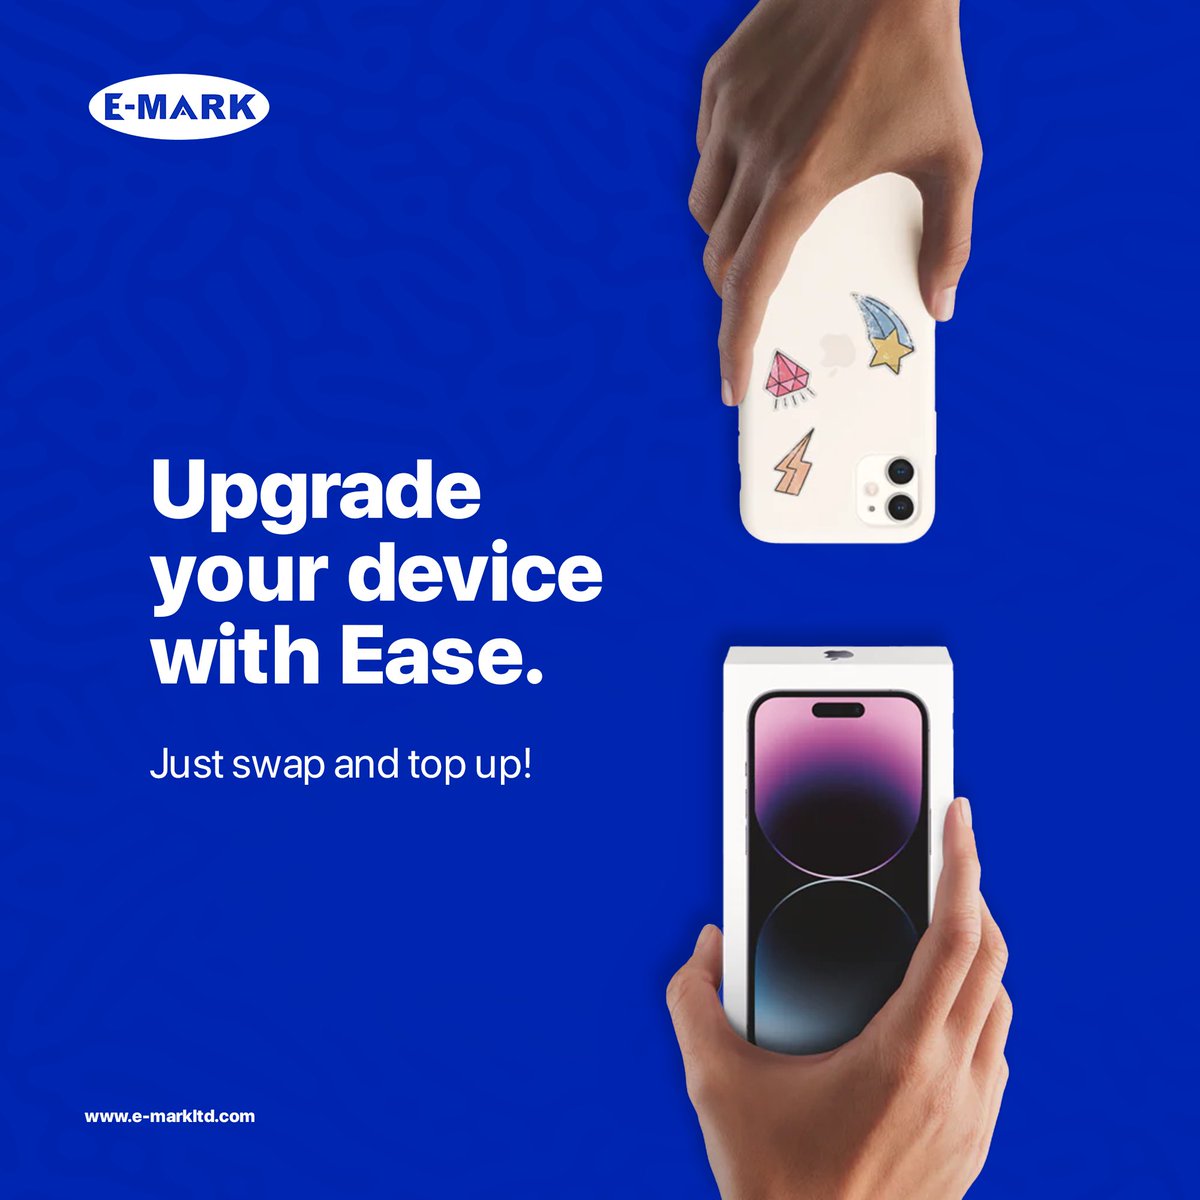 Upgrade from your old device and experience the latest in tech by trading in today, it’s that easy. #TechUp #LevelUp #ConnectingPeople